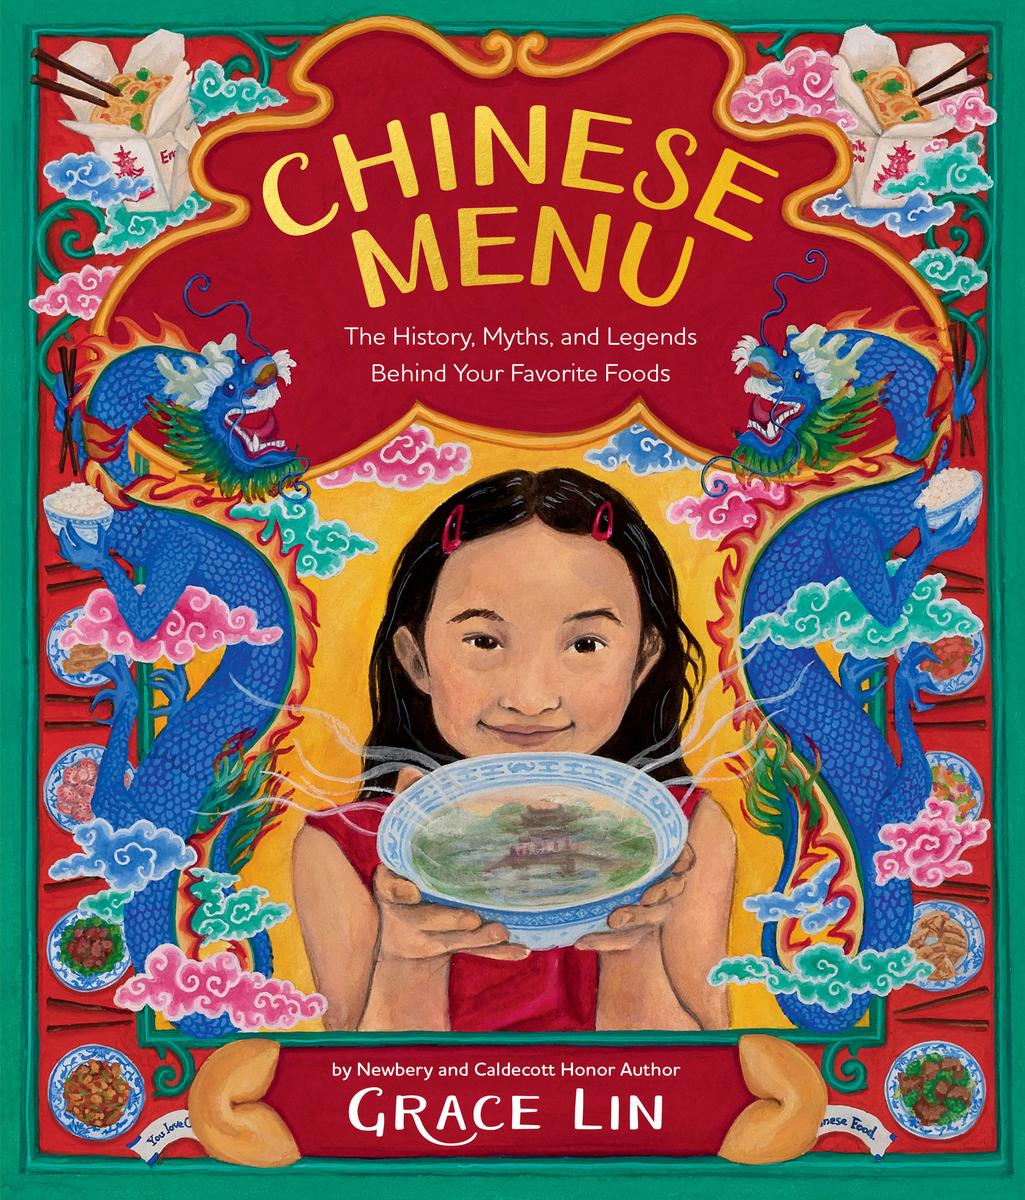 Chinese Menu - The History, Myths, and Legends Behind Your Favorite Foods